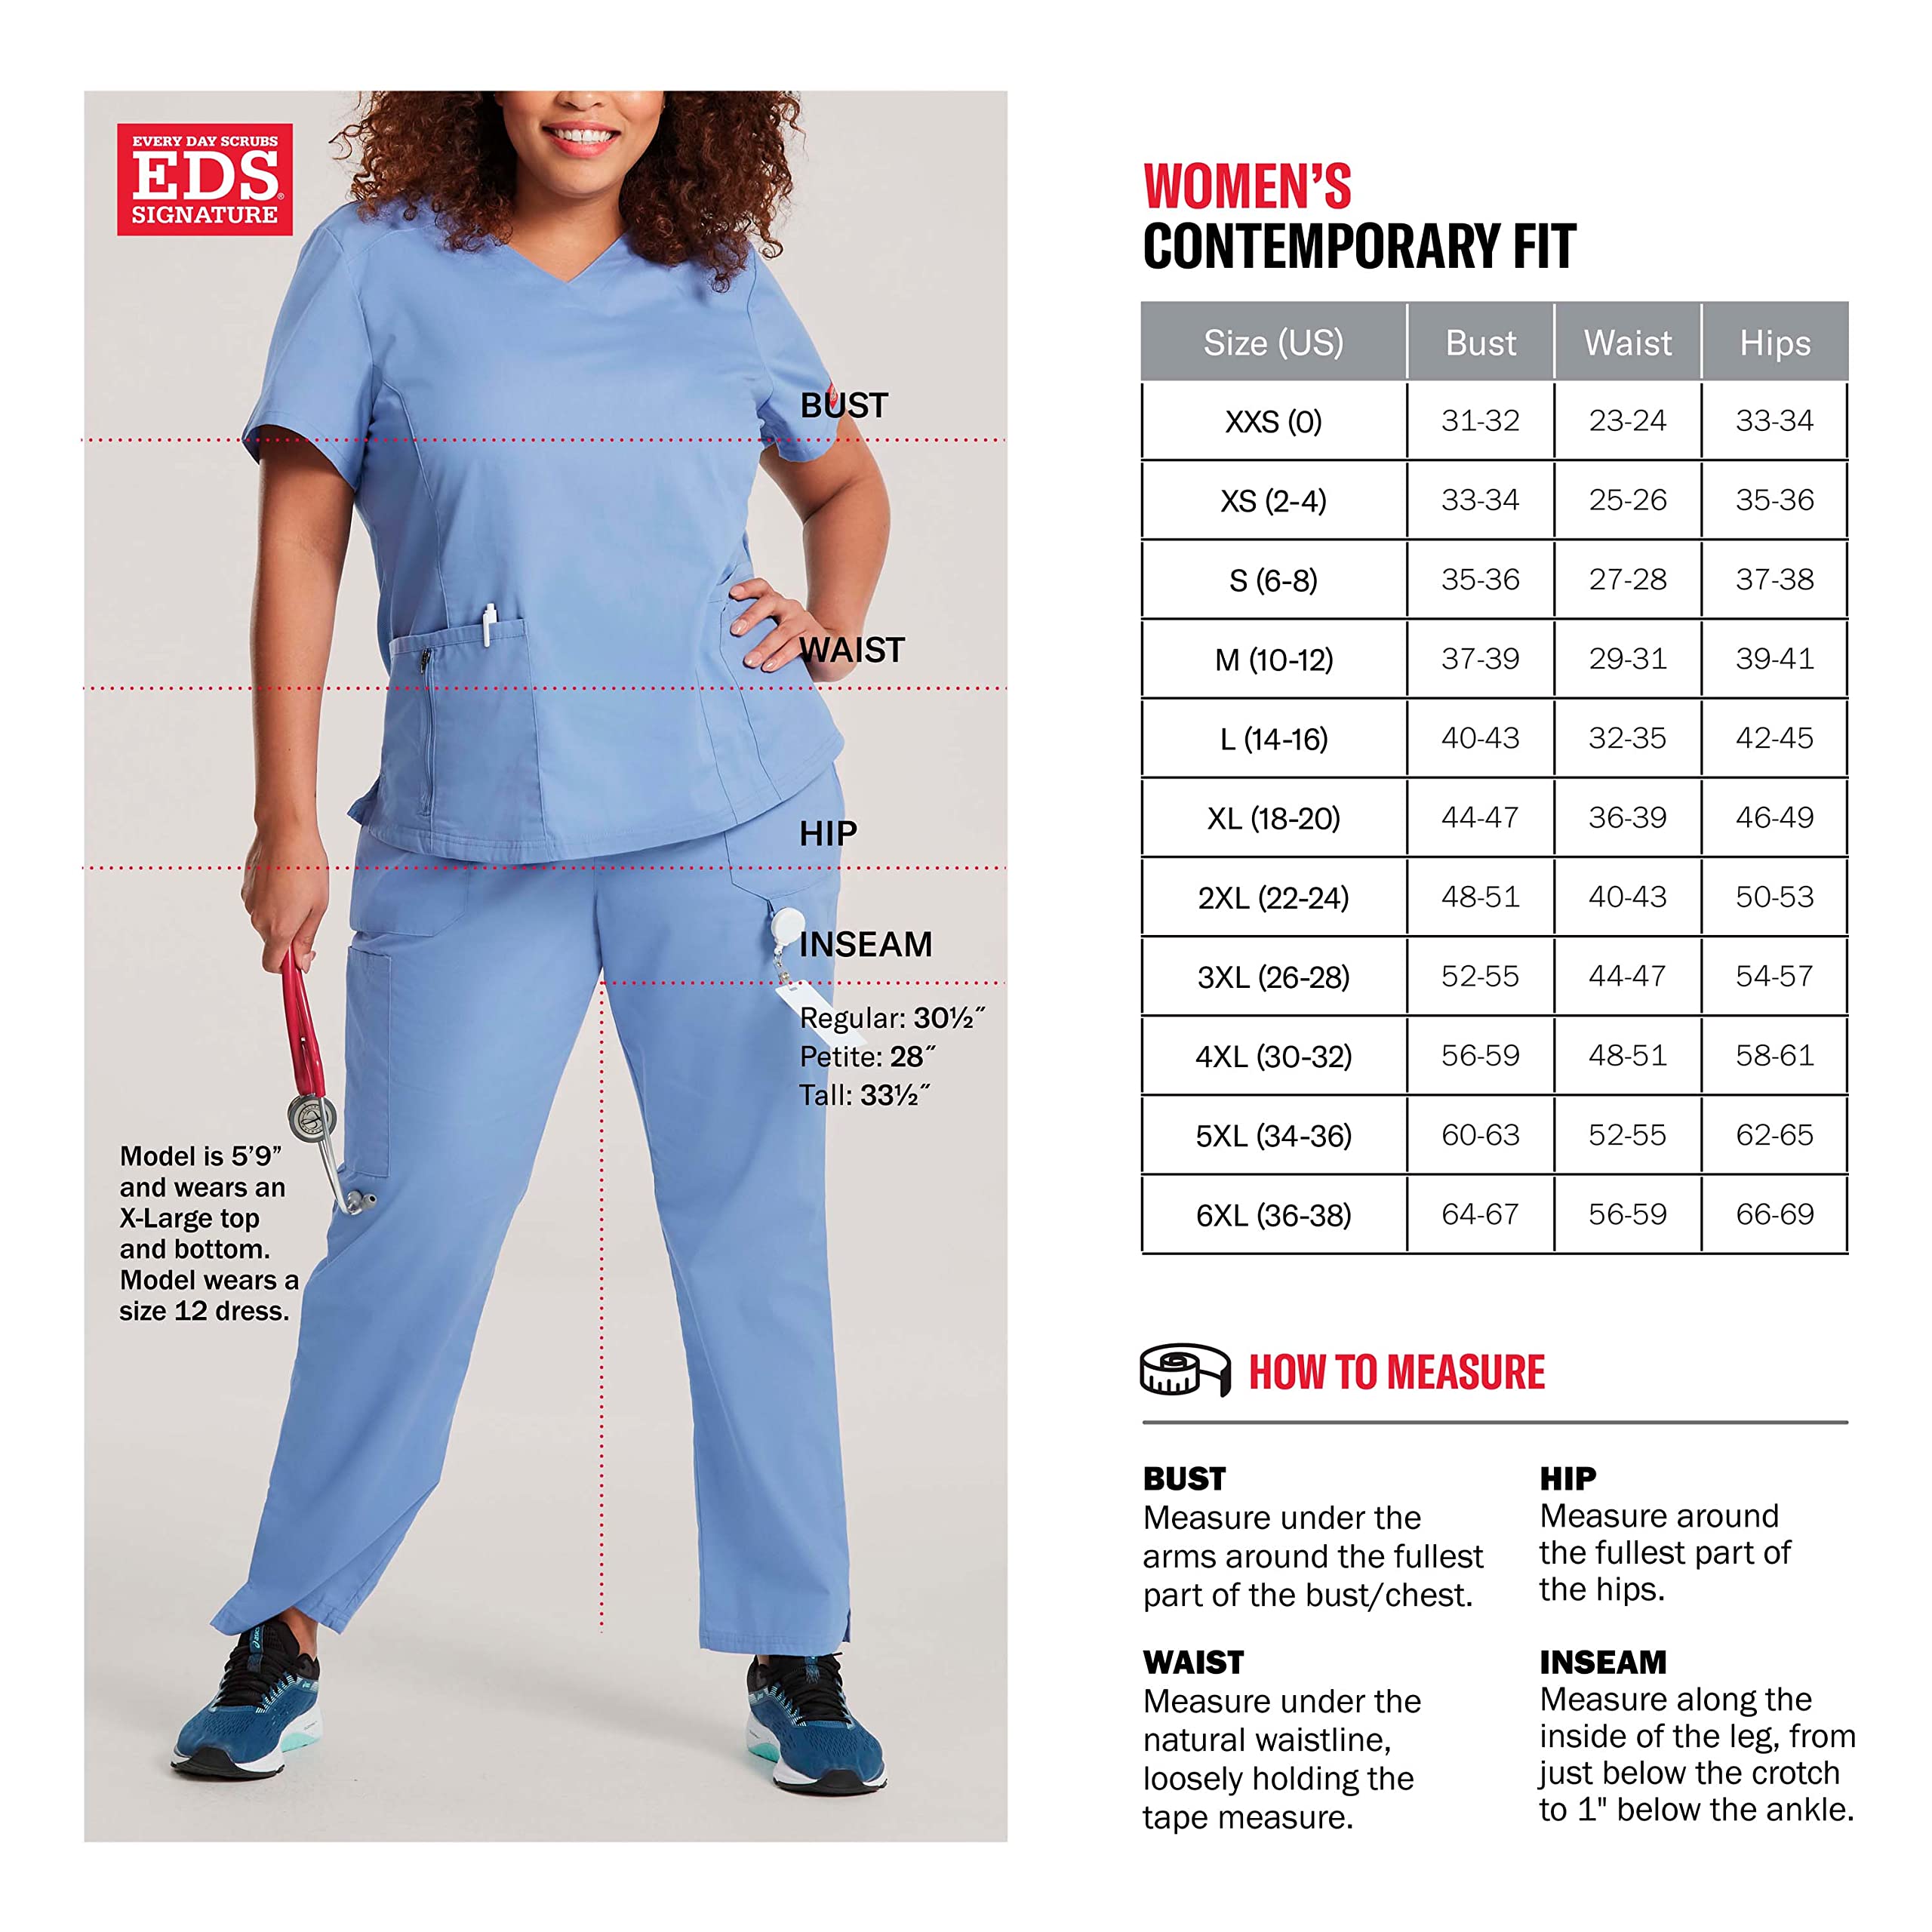 Dickies EDS Signature Scrubs for Women, Contemporary Fit V-Neck Womens Tops in Soft Brushed Poplin 85906